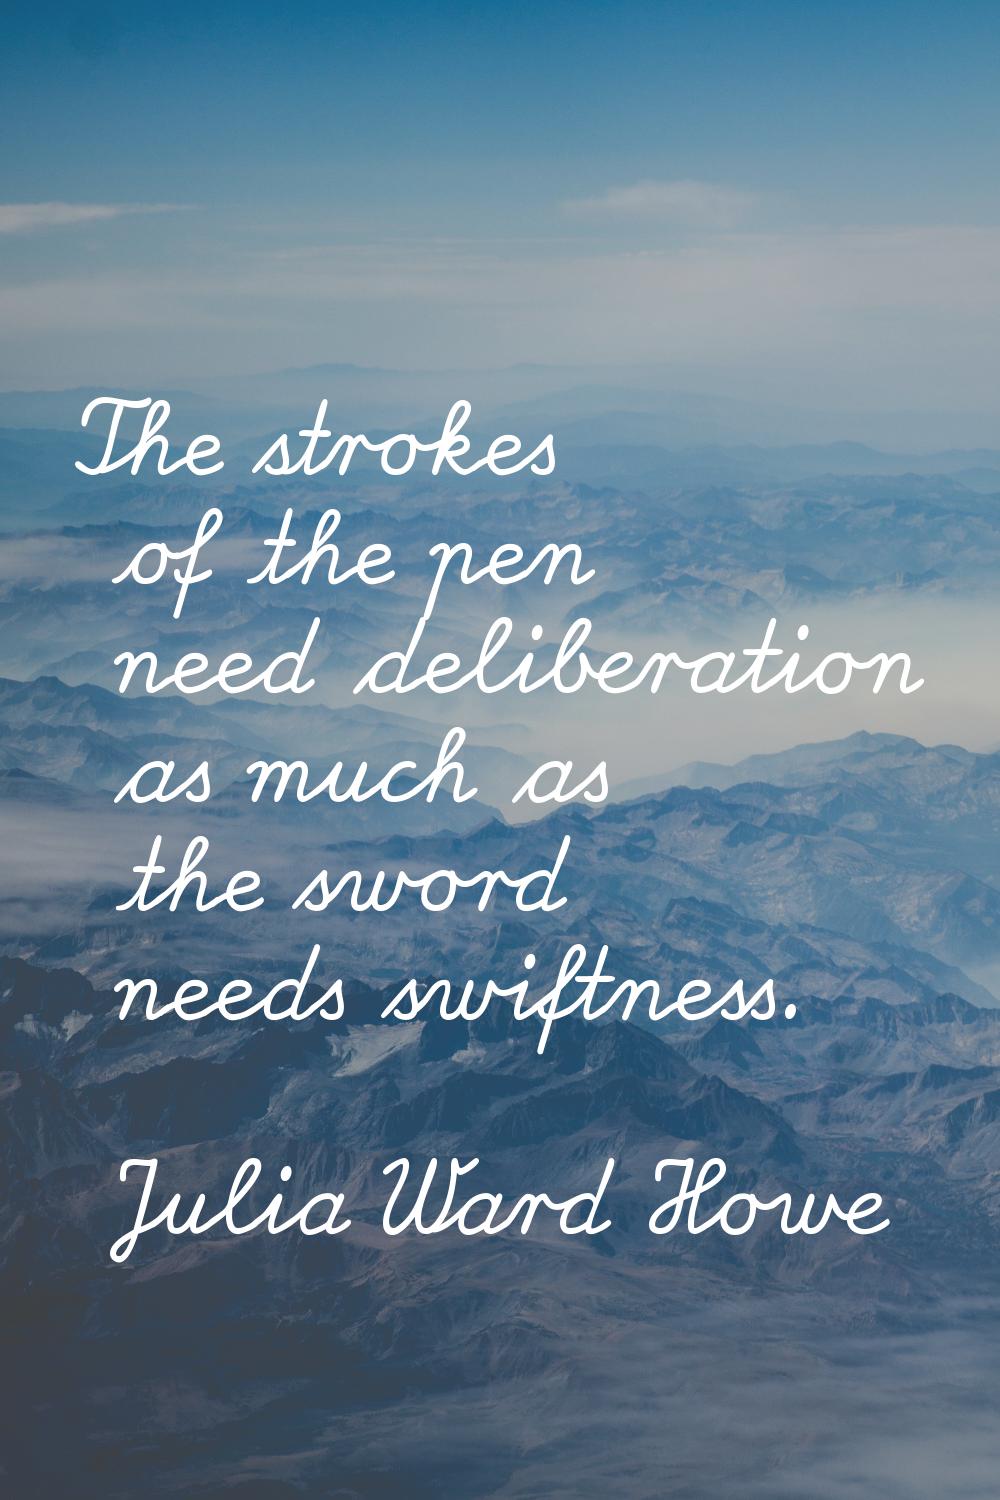 The strokes of the pen need deliberation as much as the sword needs swiftness.